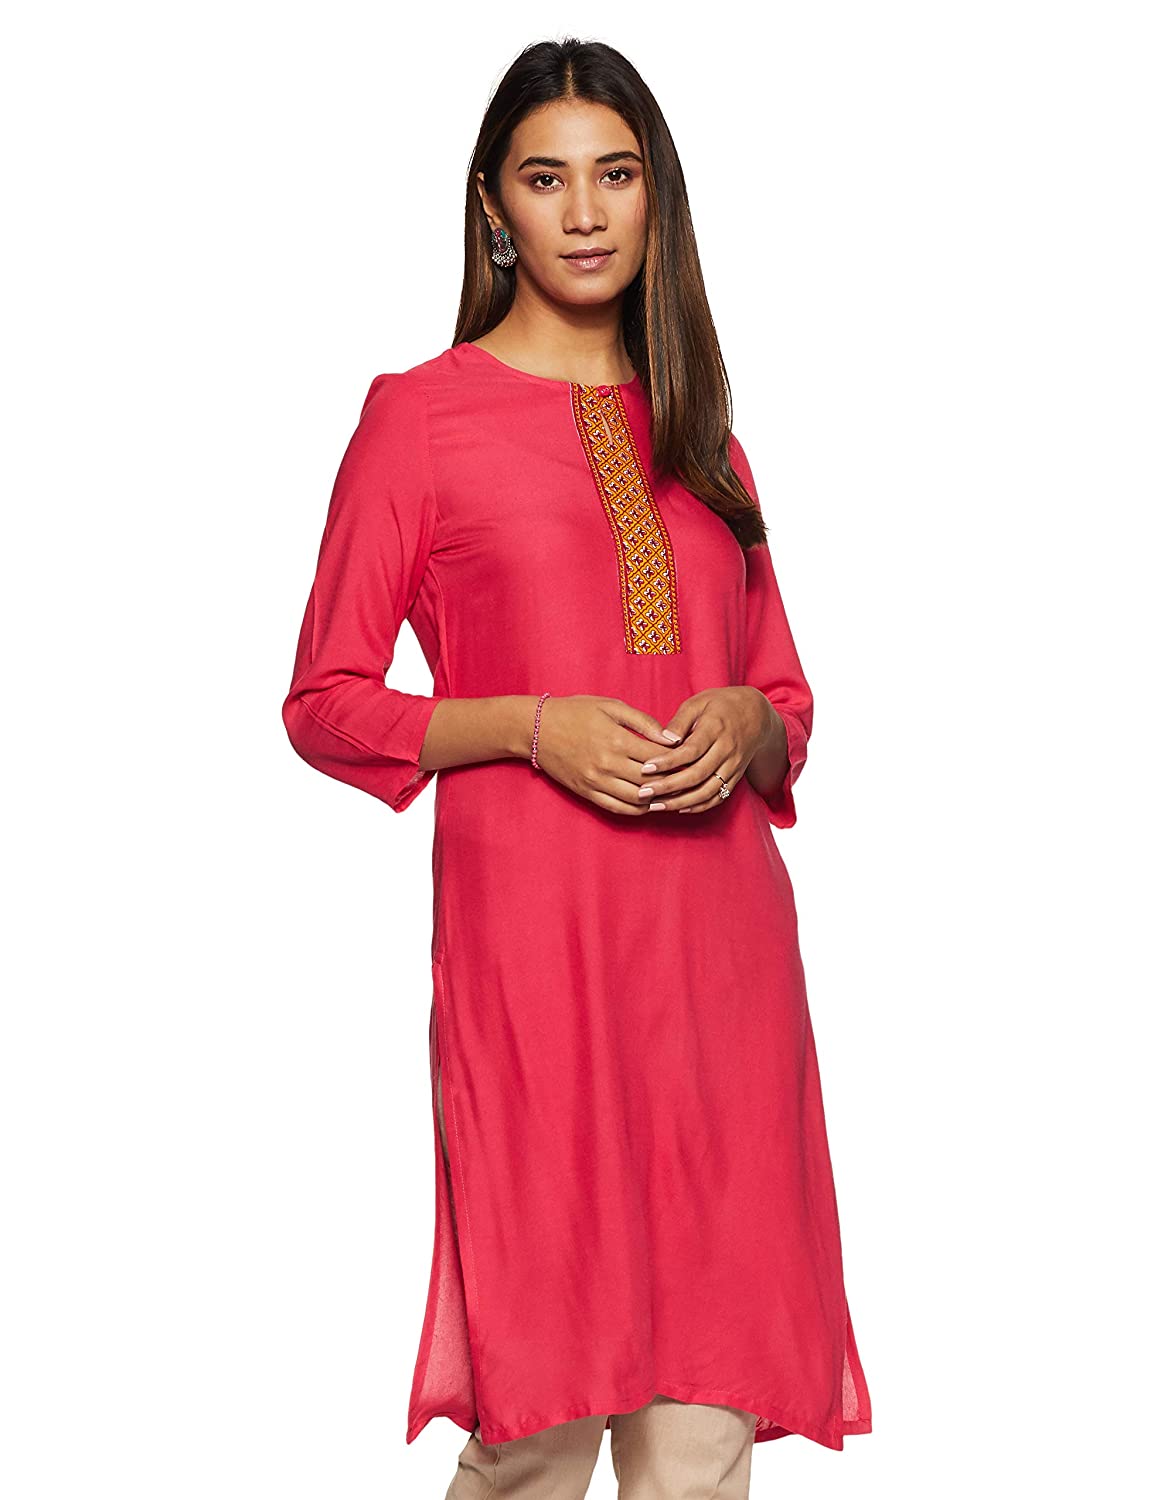 Which online site provides the best kurtis? - Quora